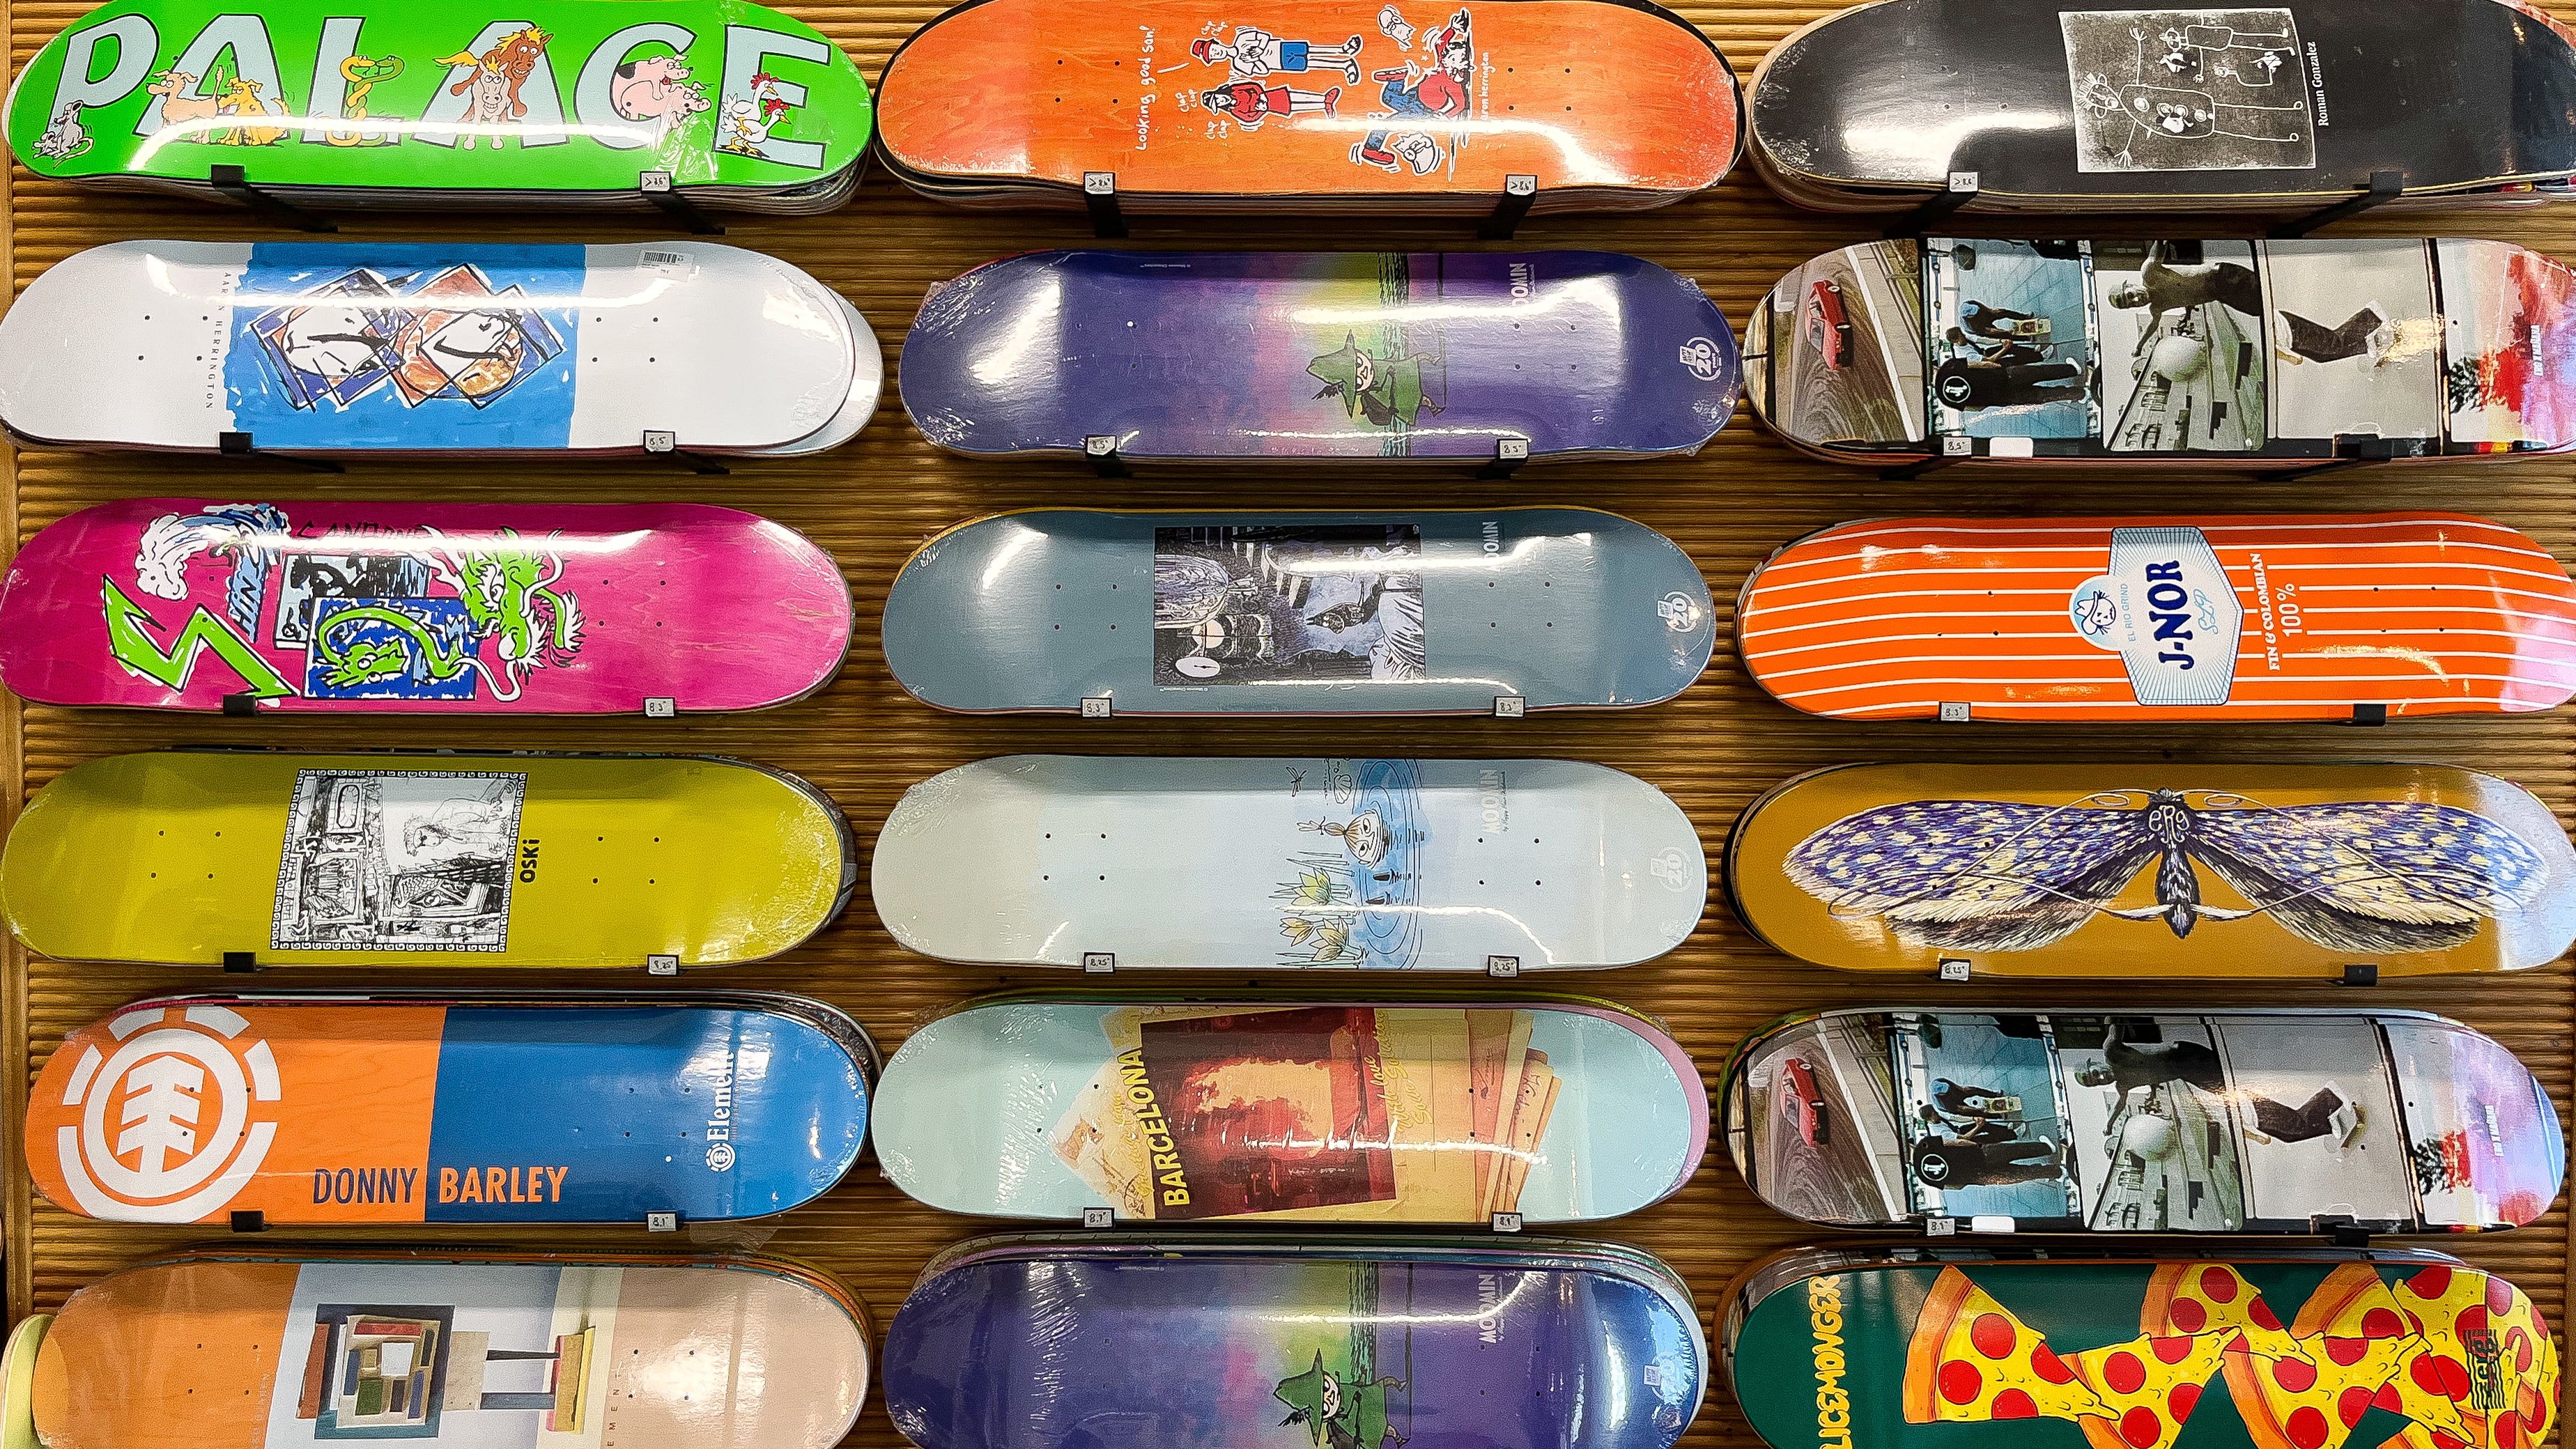 All decks buy one, get one 50% off. Automatic discount at check out. Mañana Skate Shop decks.